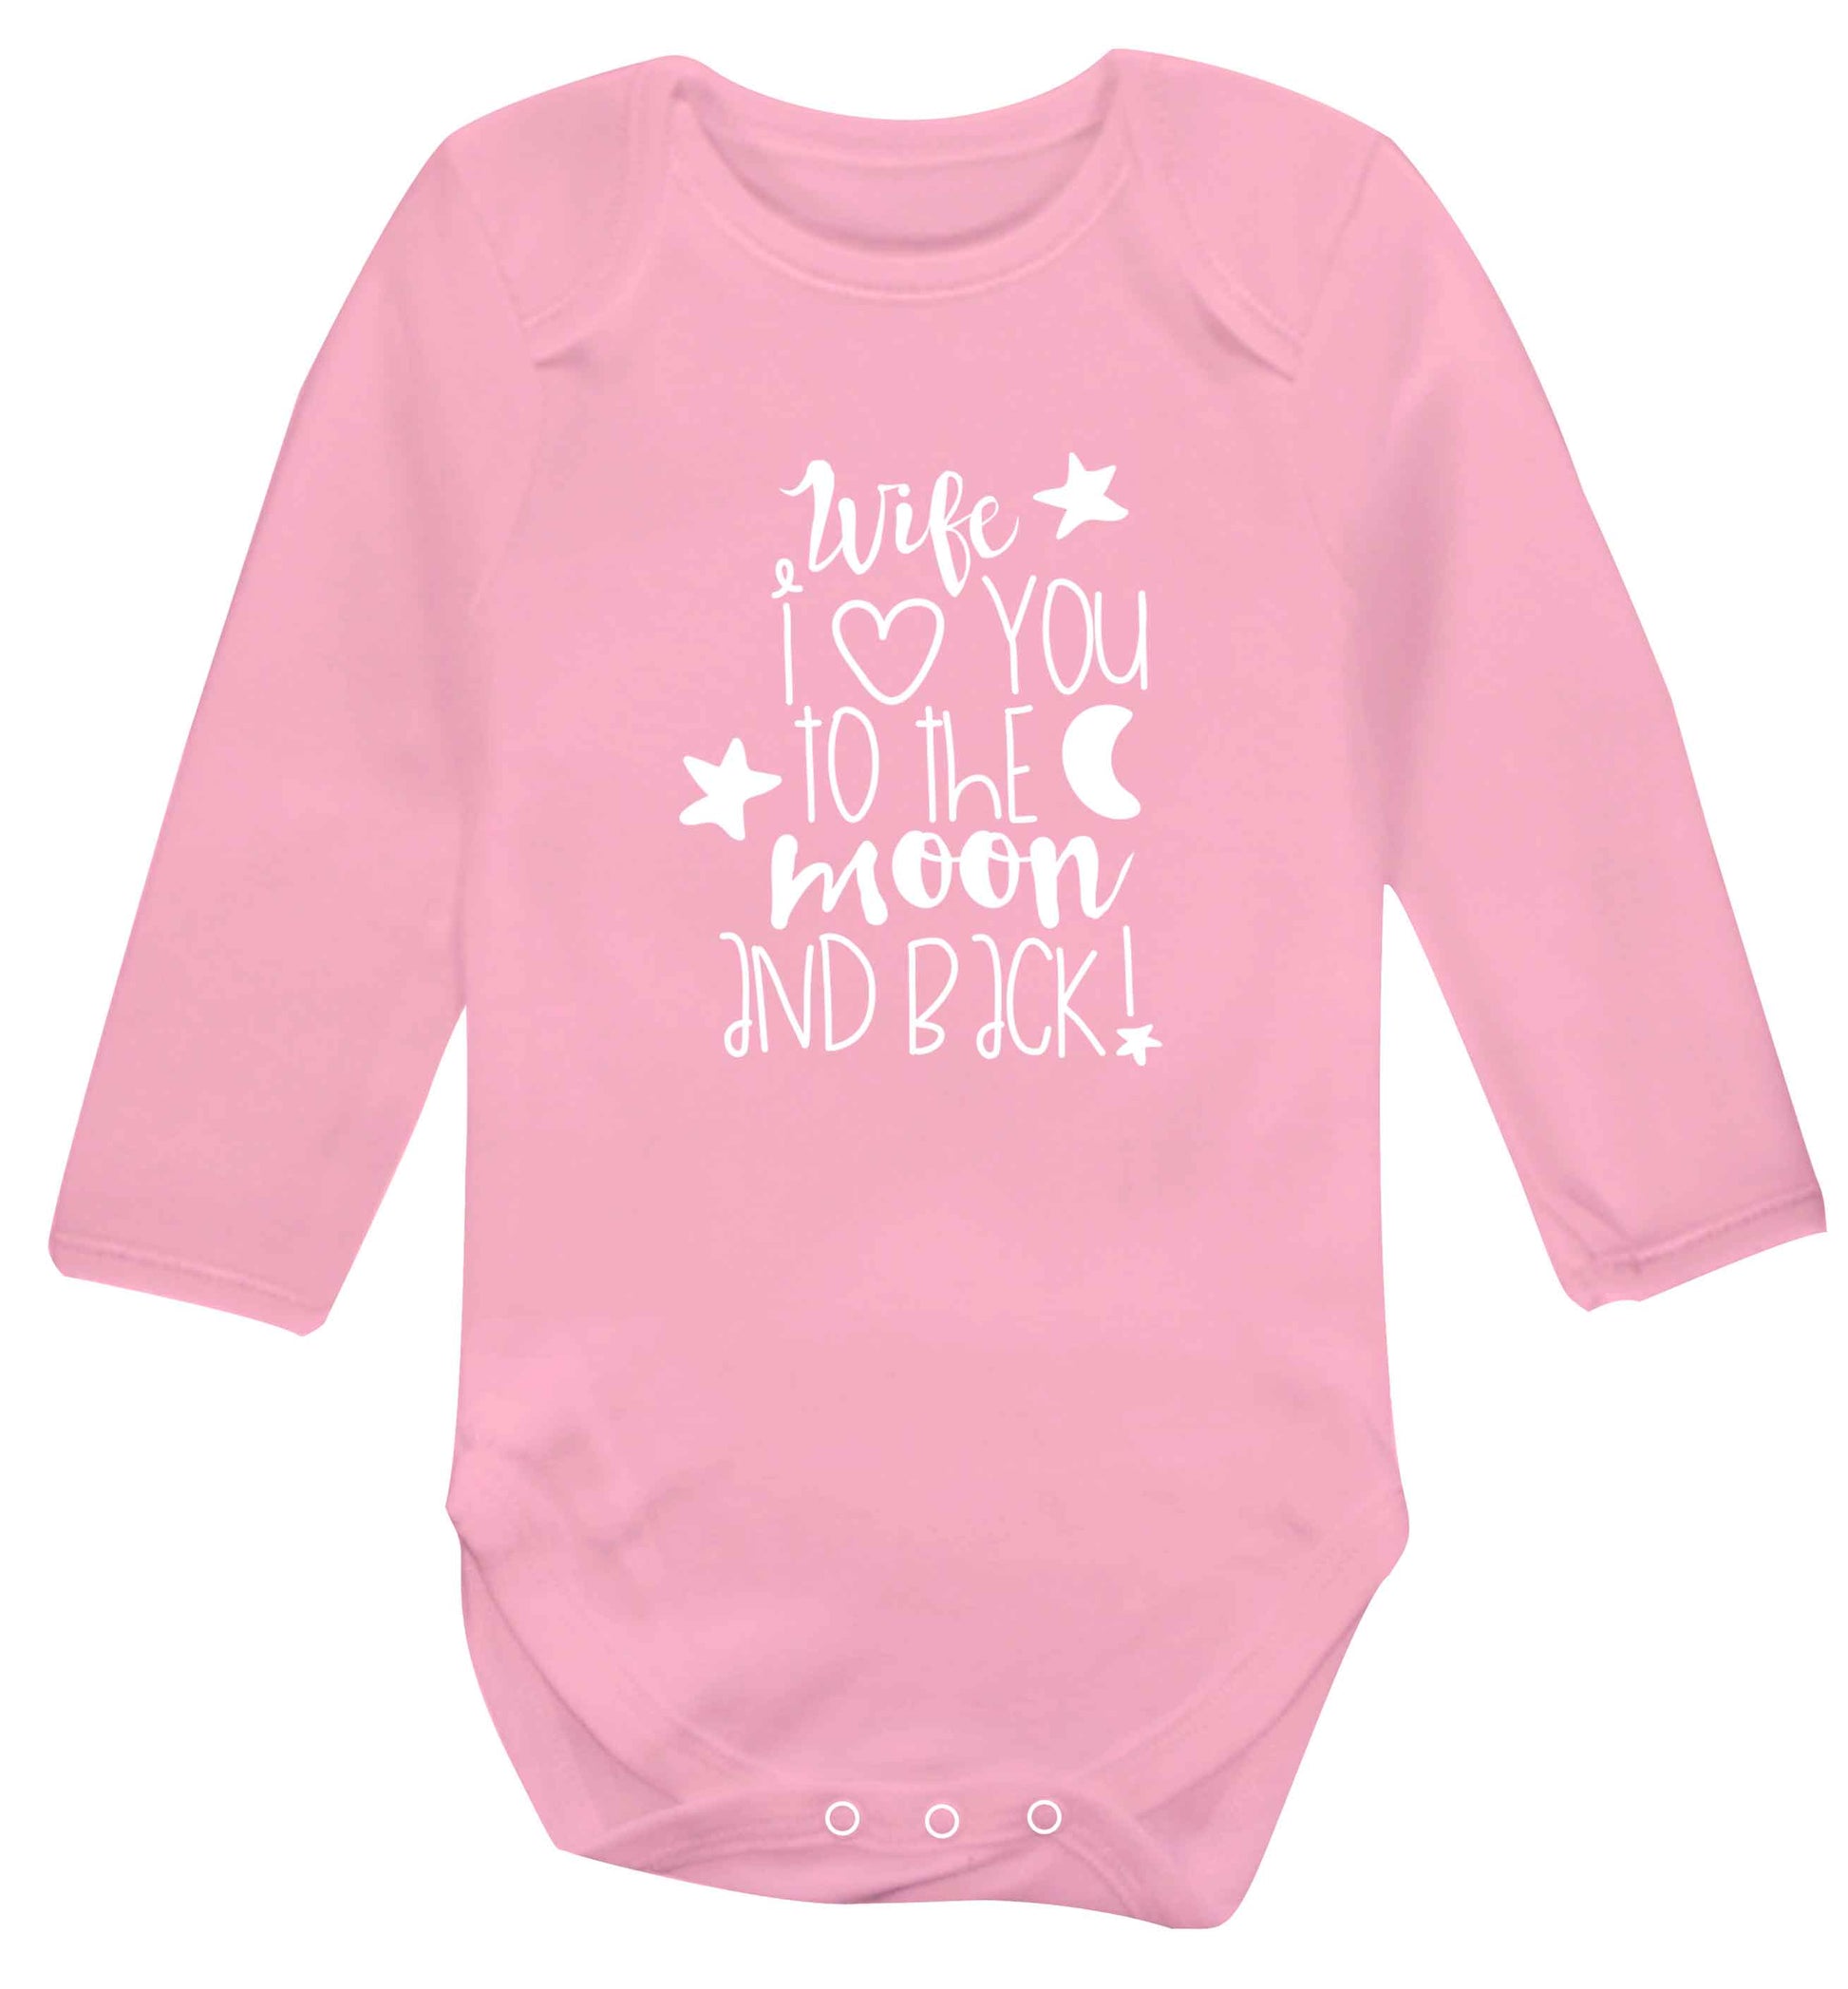 Wife I love you to the moon and back baby vest long sleeved pale pink 6-12 months